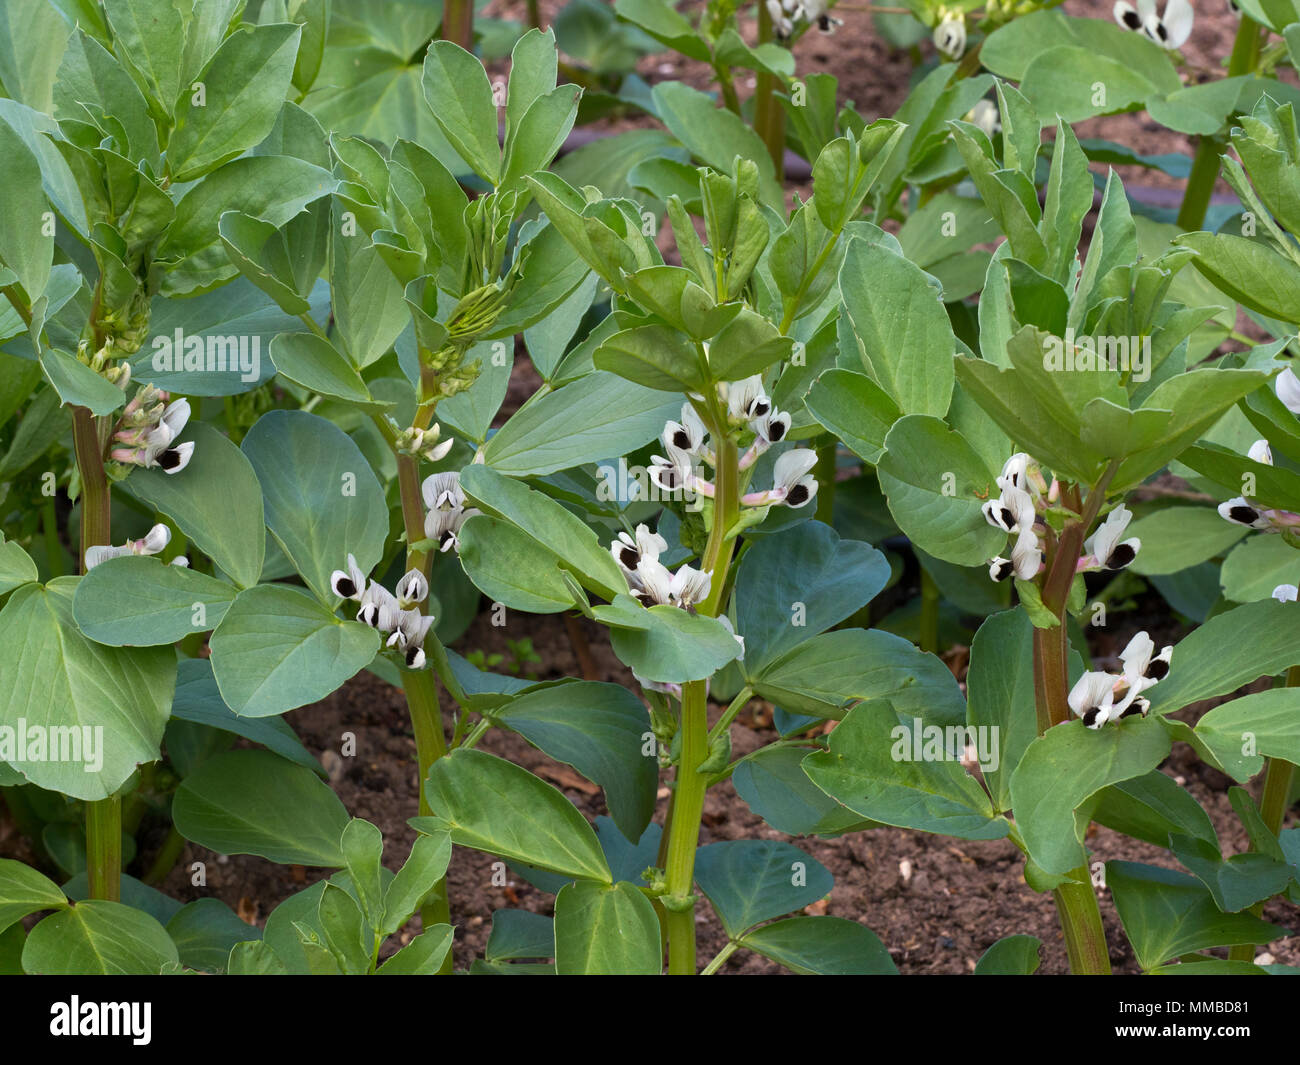 Broad Bean 'Aquadulce Claudia' in flower in grow your own garden Stock Photo